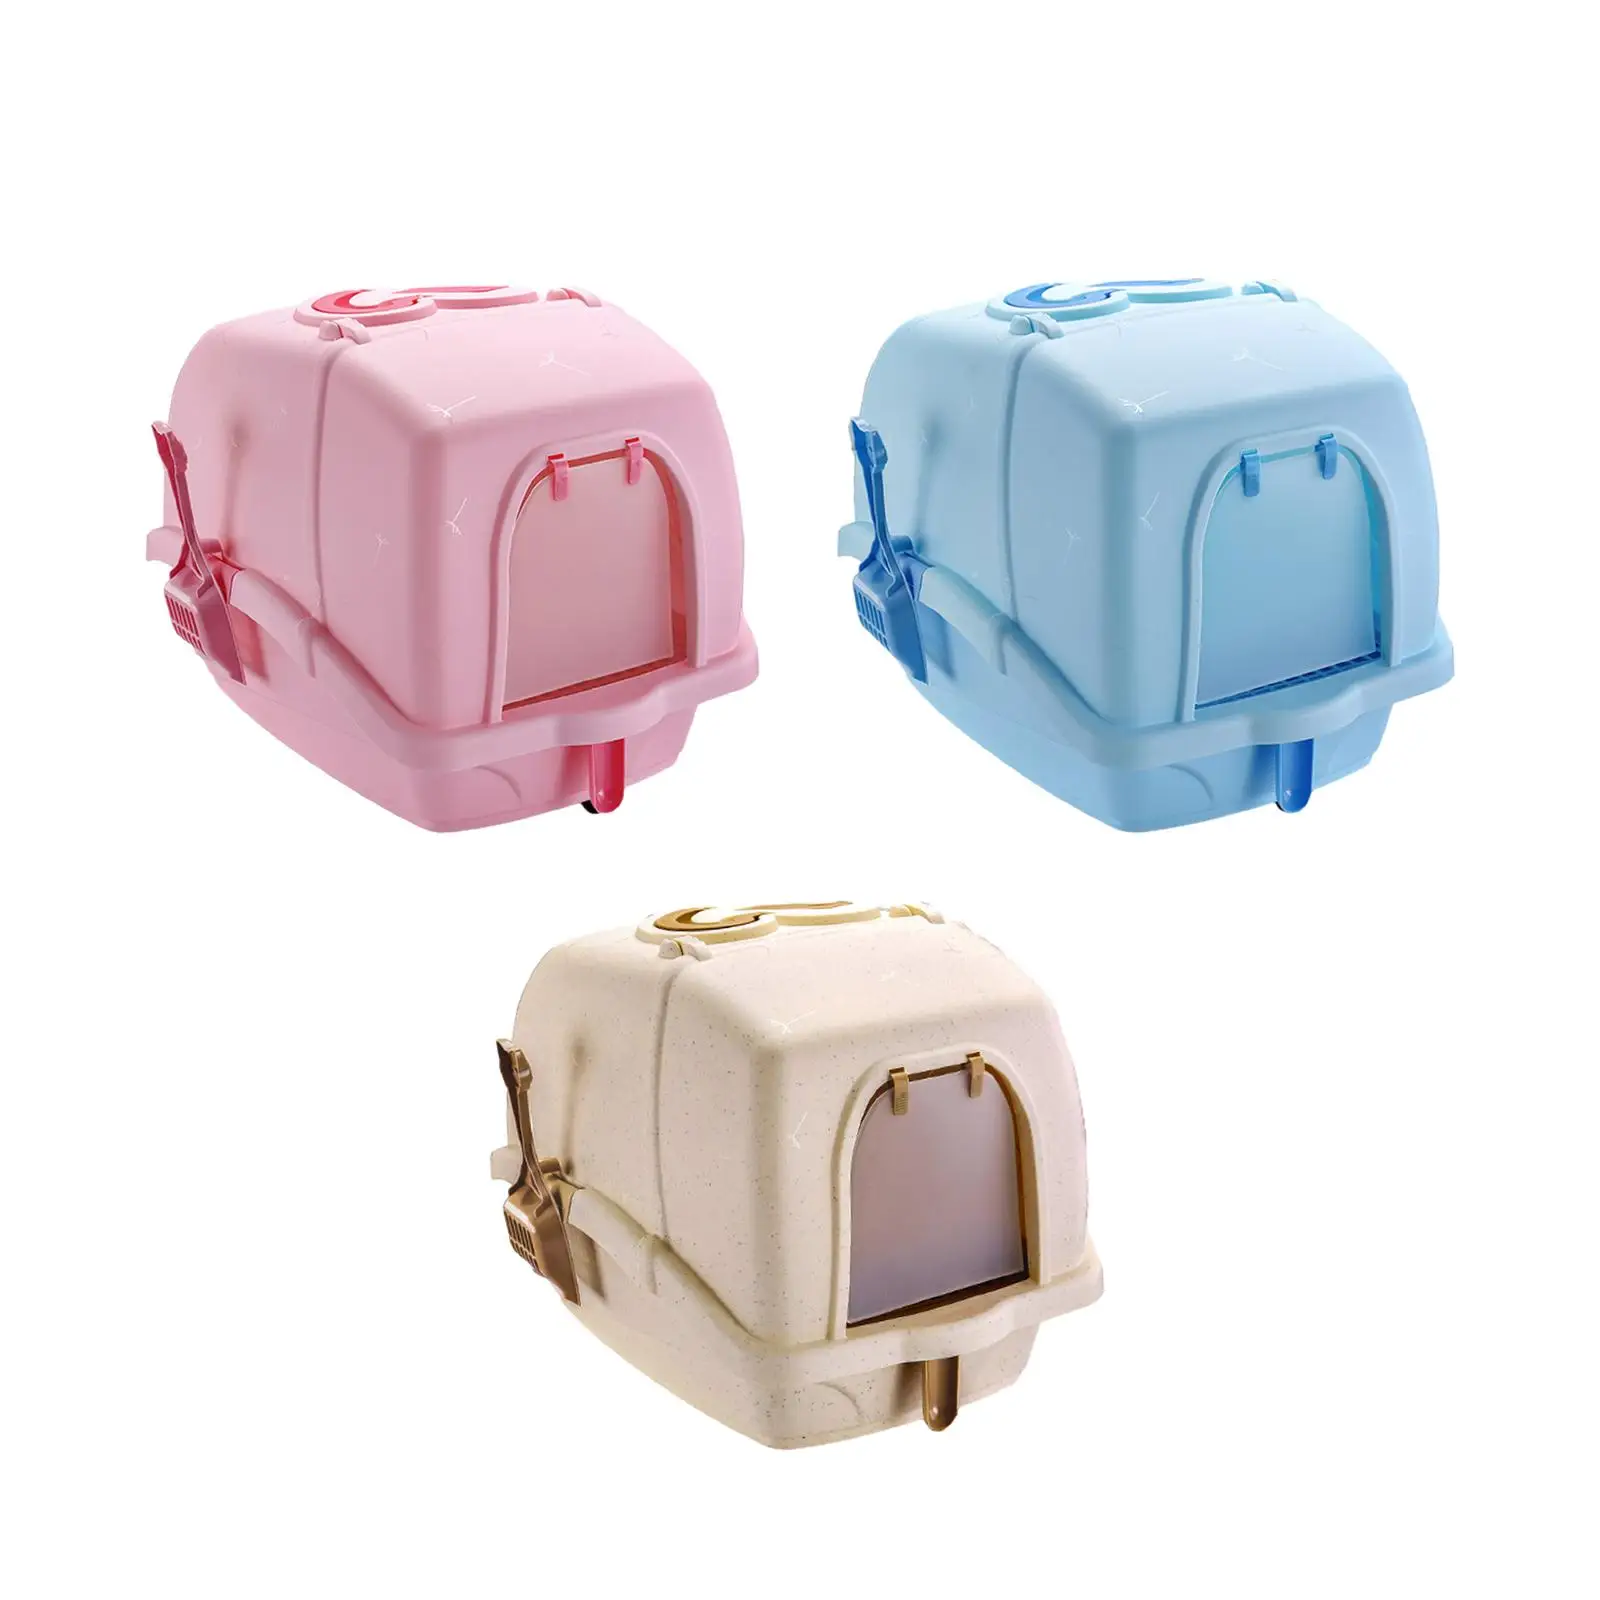 Fully Enclosed Cat Litter Box Pet Litter Tray Hollow Pedal Leakproof with Door Portable Pet Supplies with Handle Kitten Potty